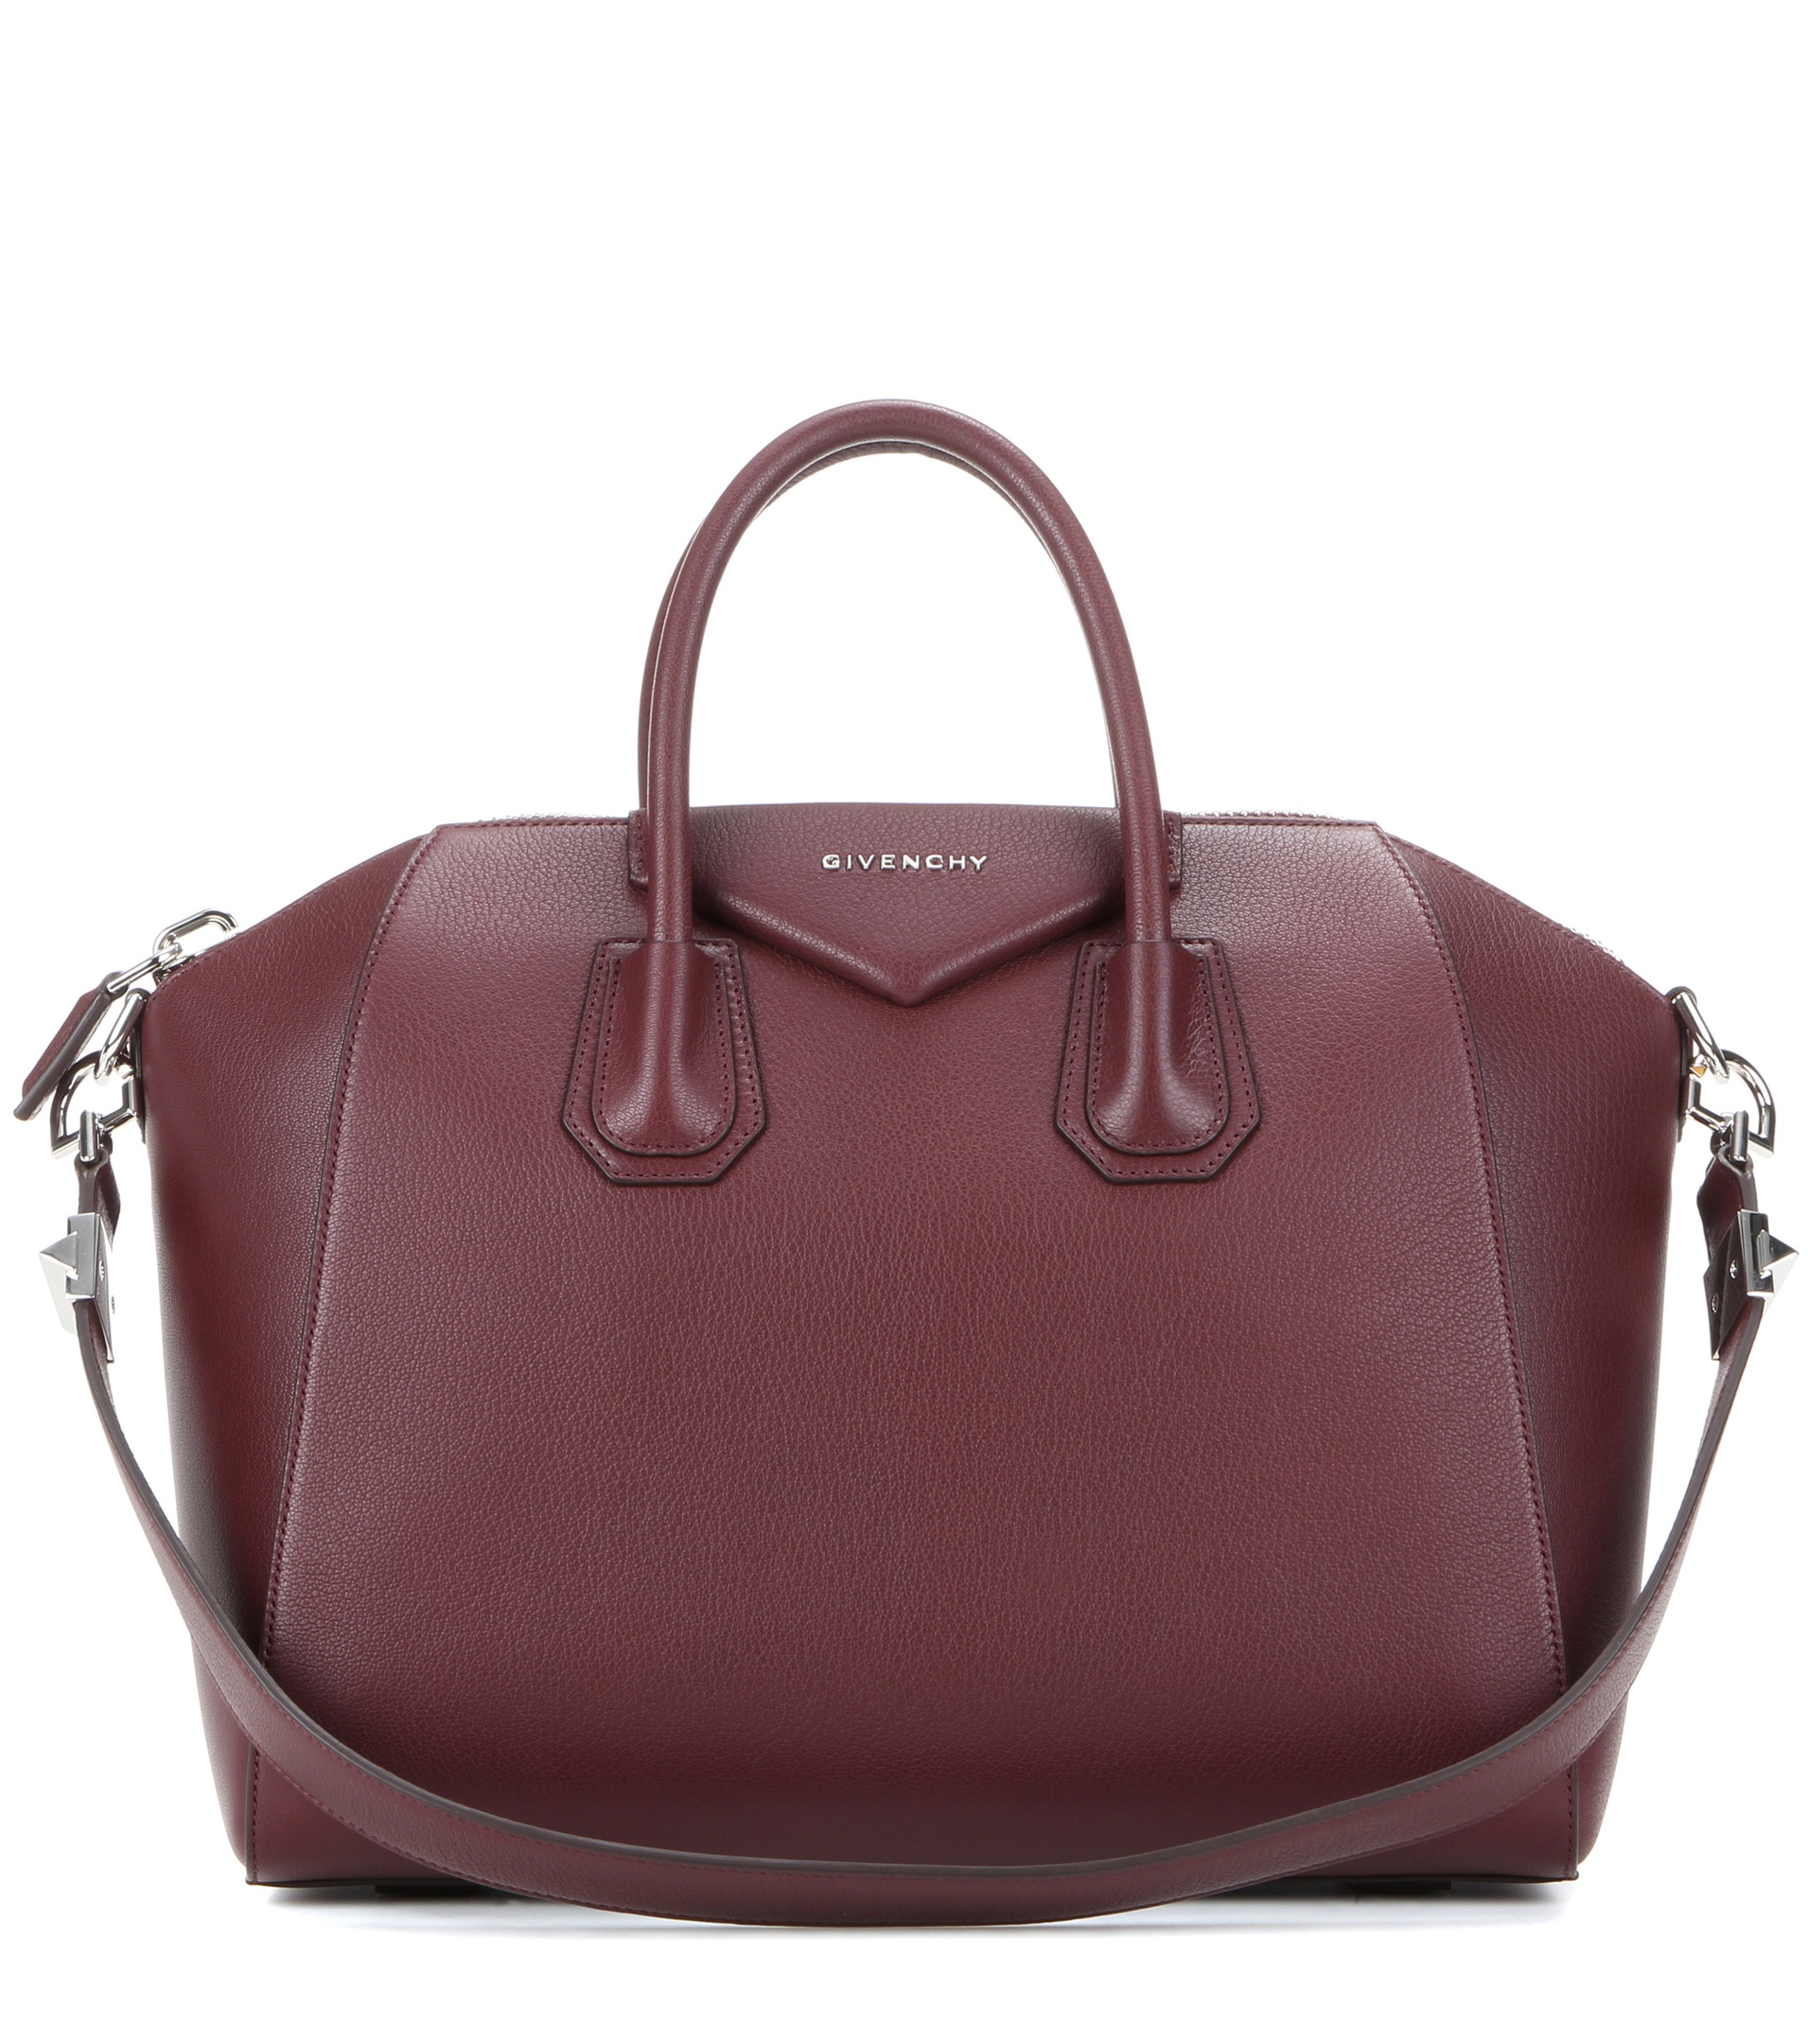 Givenchy Antigona Medium Leather Tote in Red | Lyst